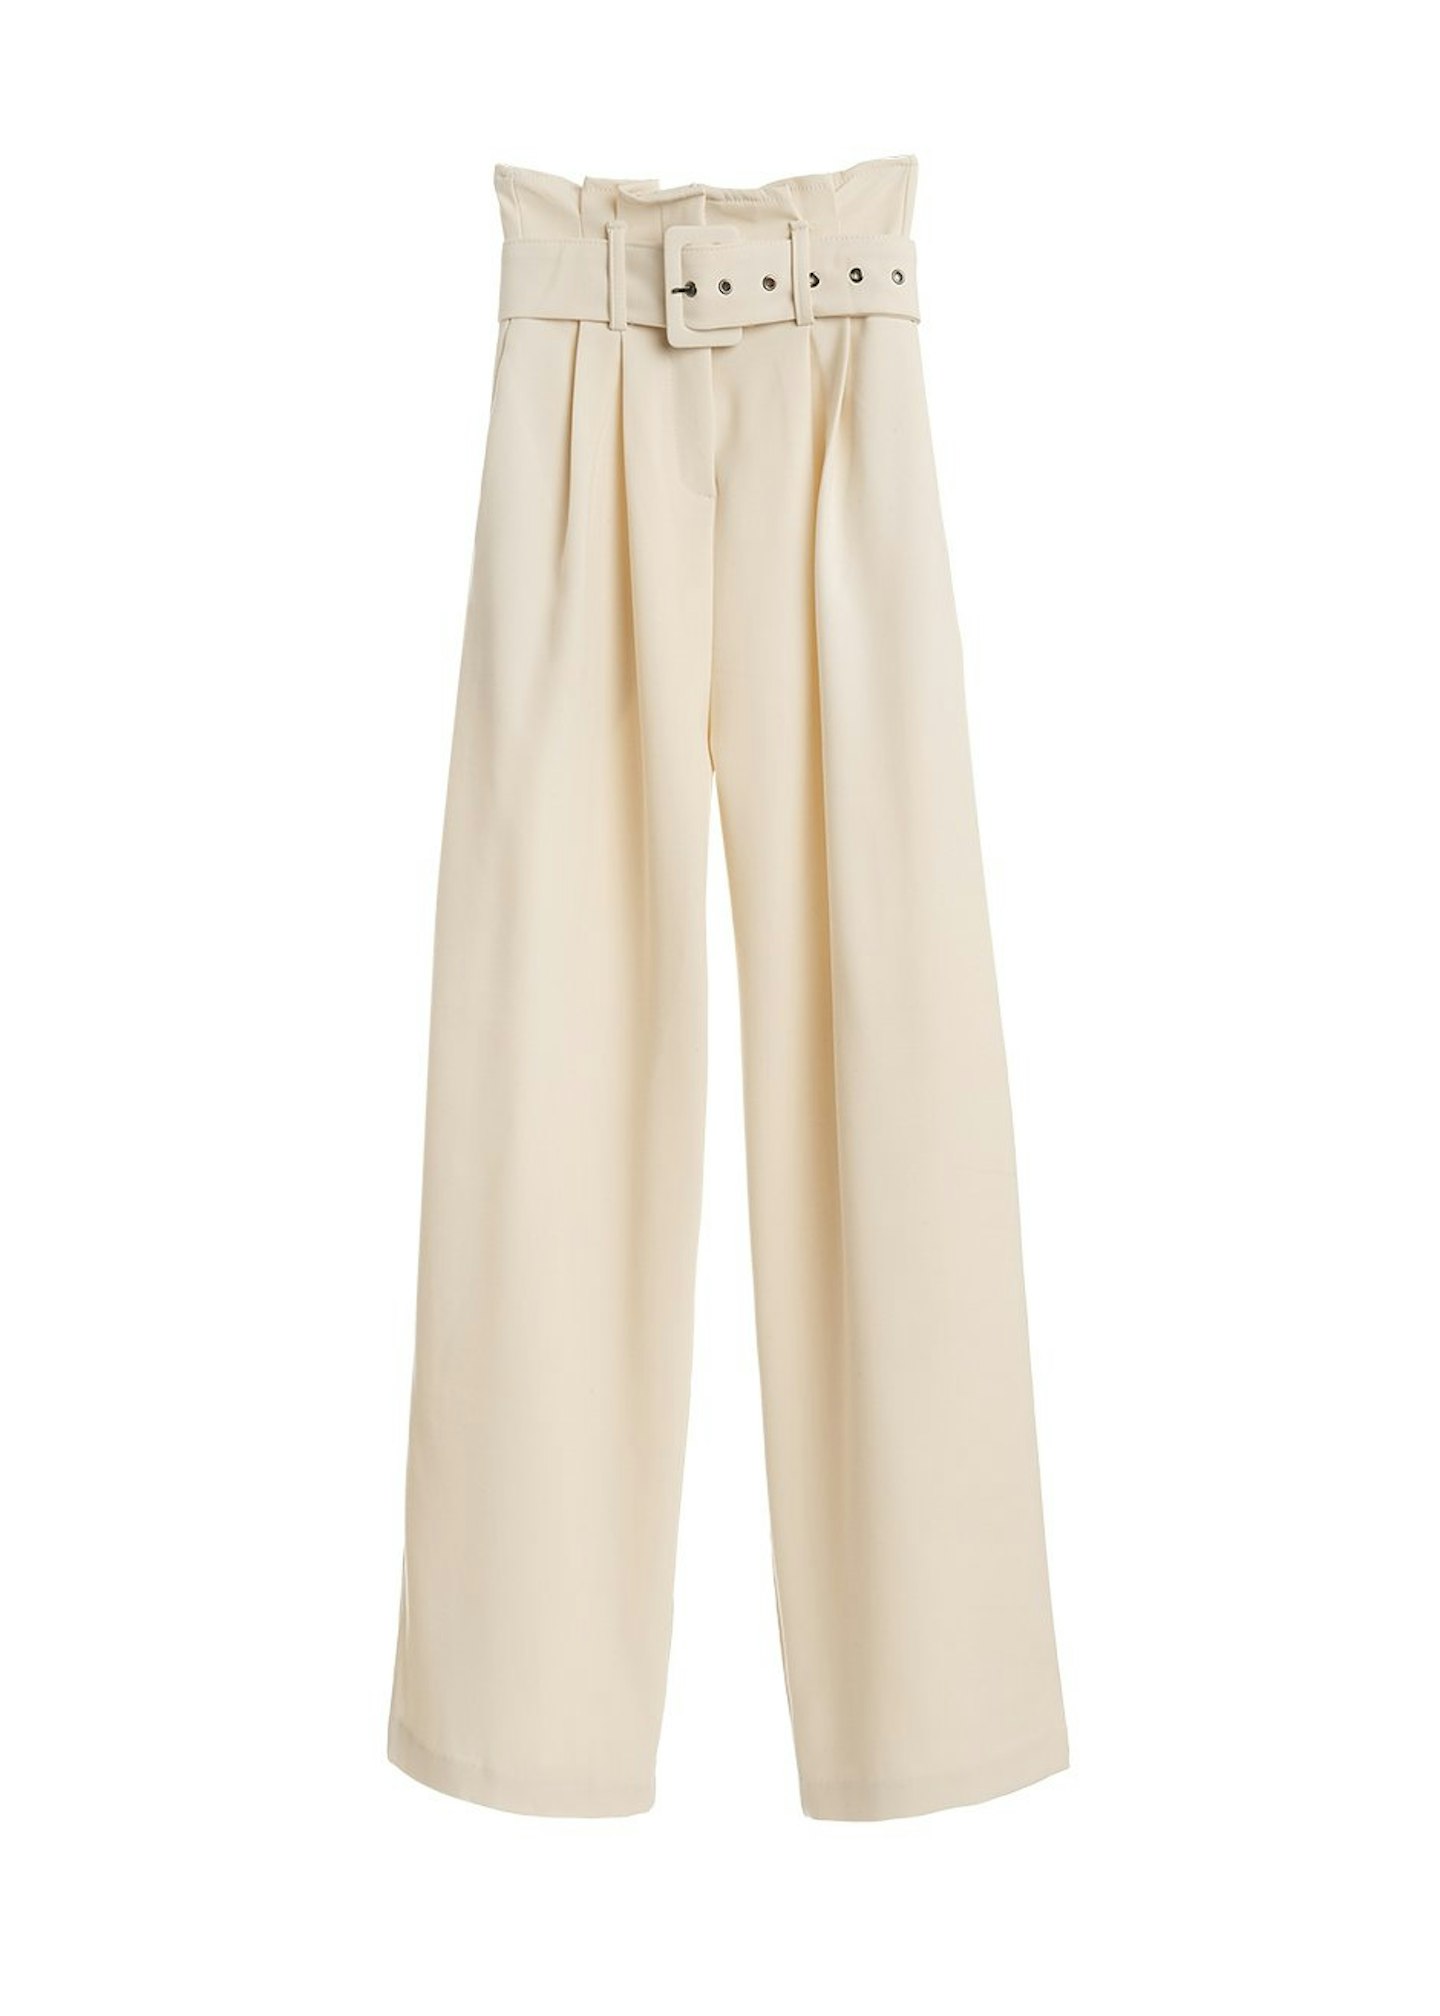 The Frankie Shop, Cream Wide-Leg Belted Pants